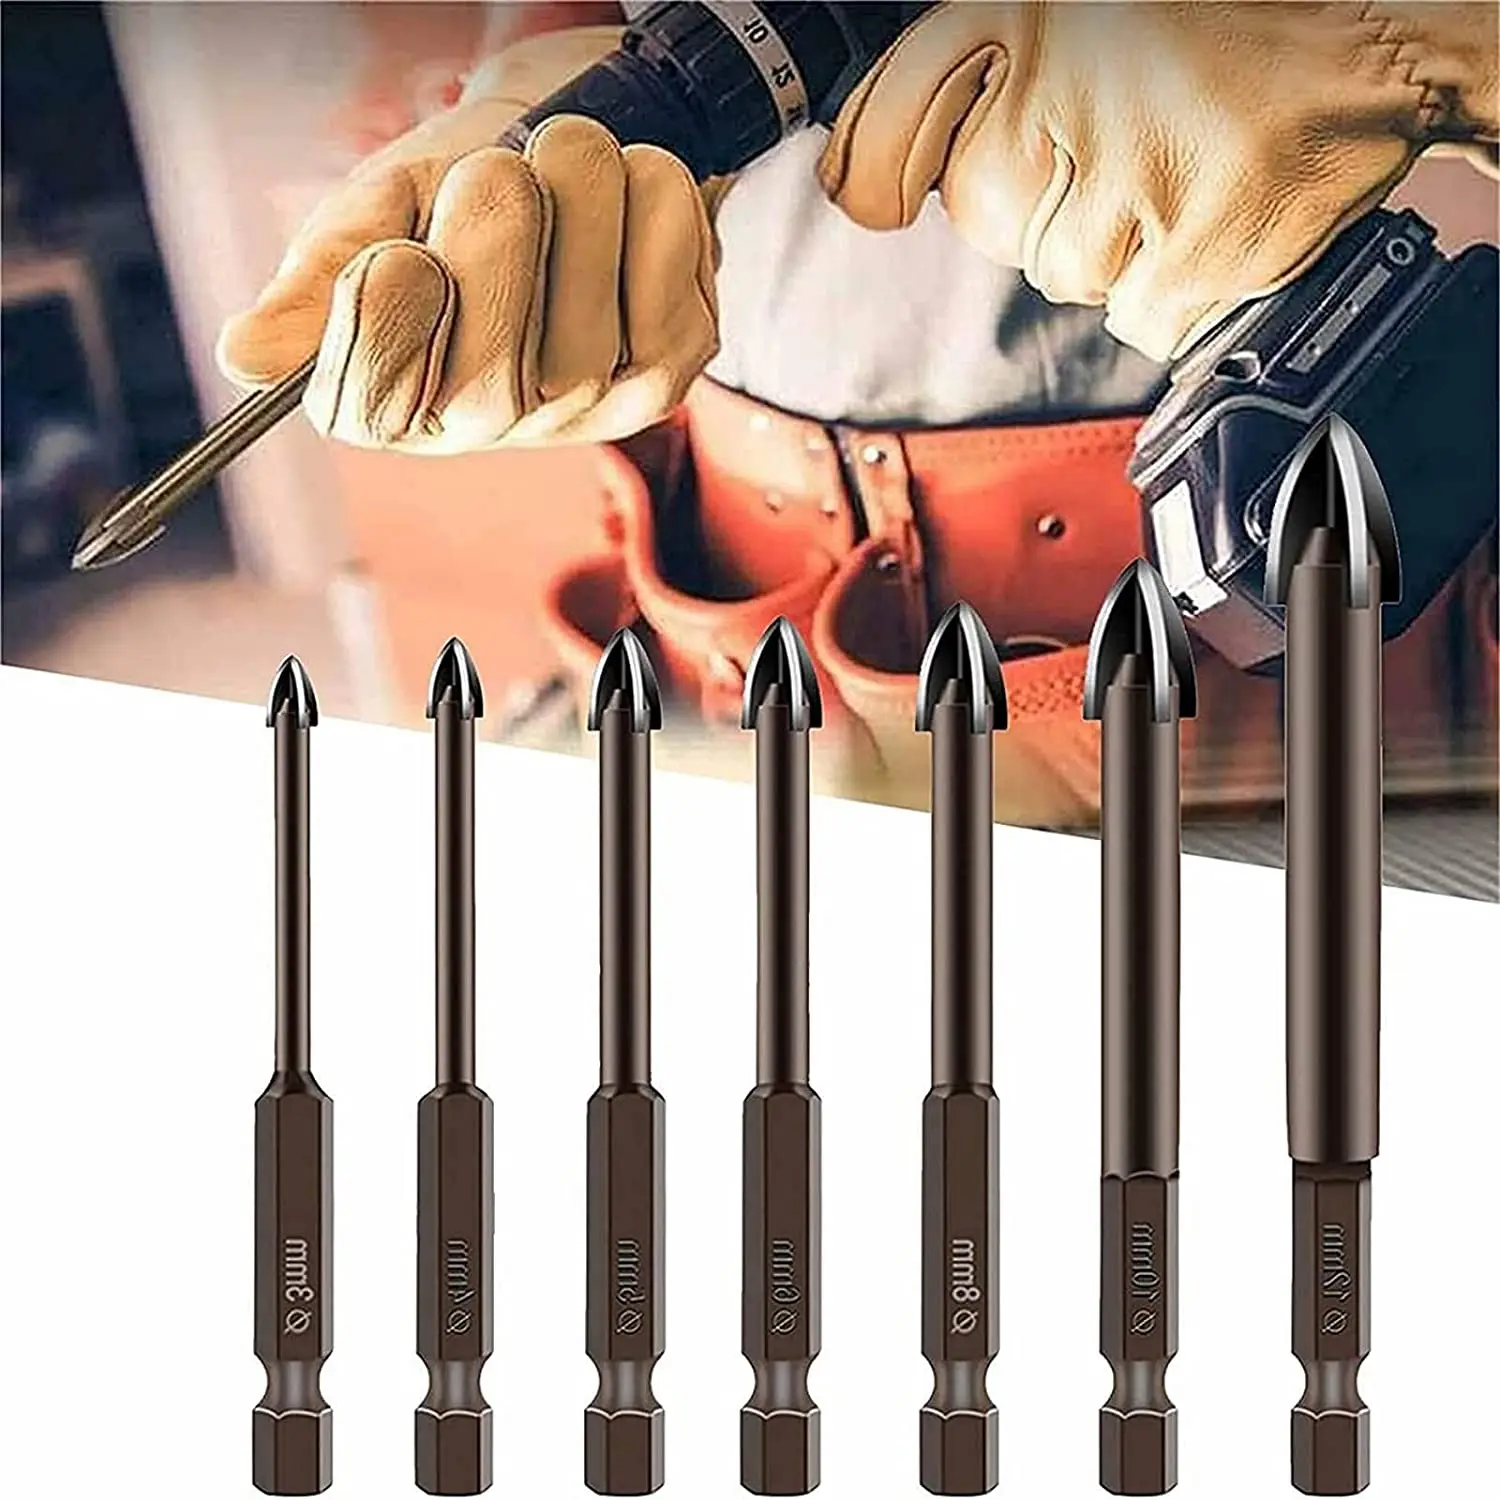 Efficient Universal Drilling Tool Multifunctional Cross Alloy Drill Bit Tile Concrete Glass Wall Hole Opening Tools Accessories 10pcs 6mm glass concrete drill bit ceramic tile marble spear head hex shank universal drilling tool hole opener for wall plastic